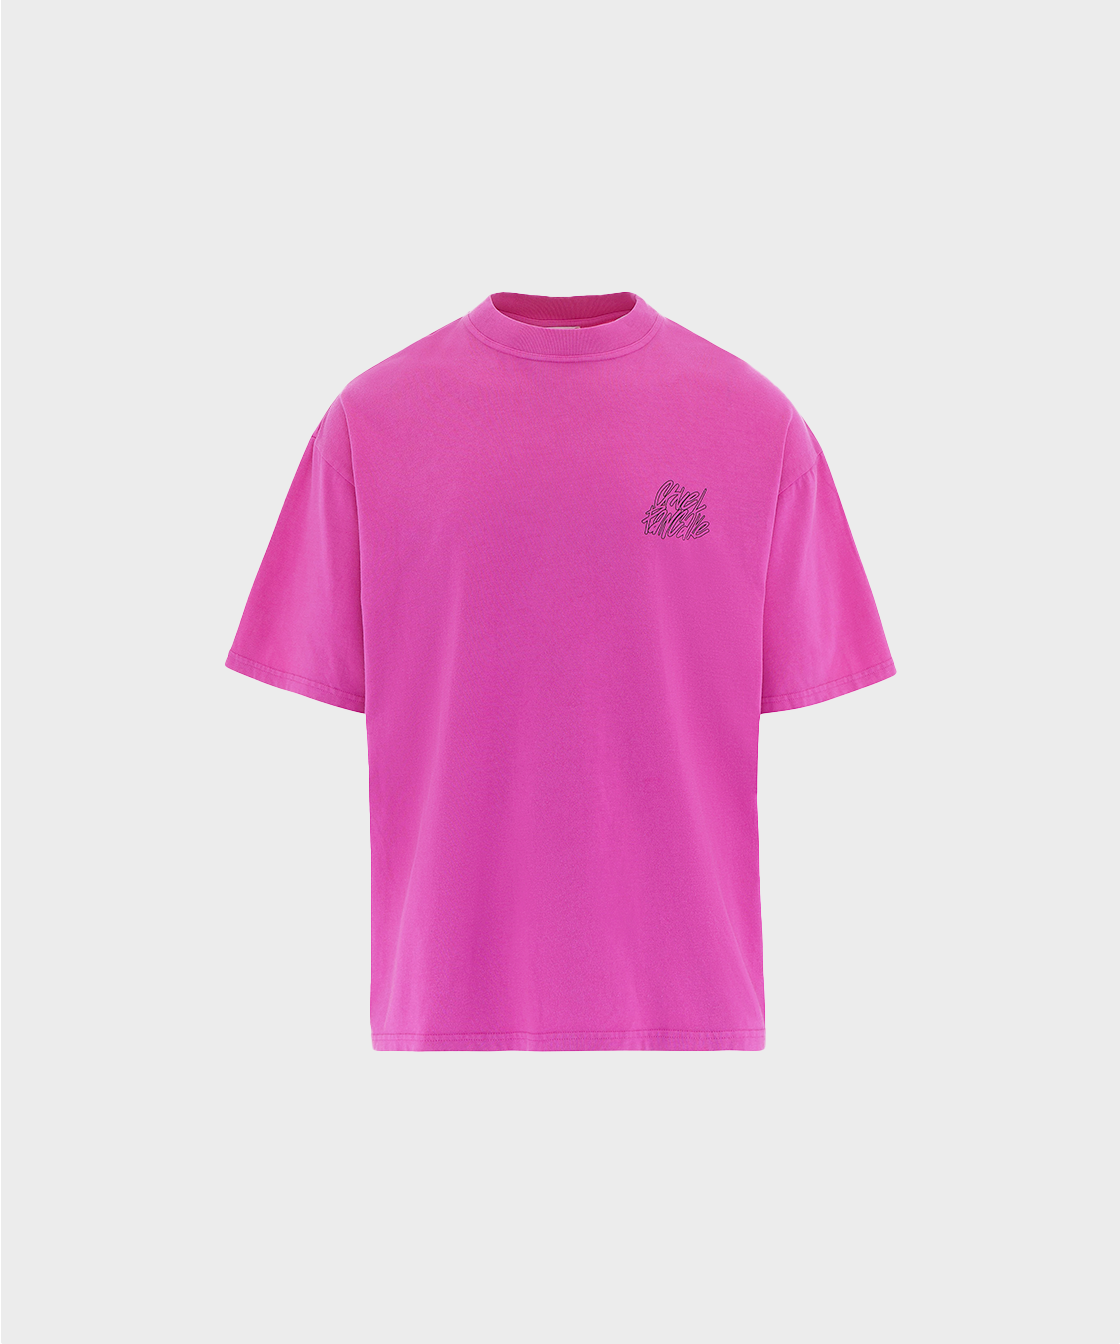 Let's make some noise t-shirt - pink fade out